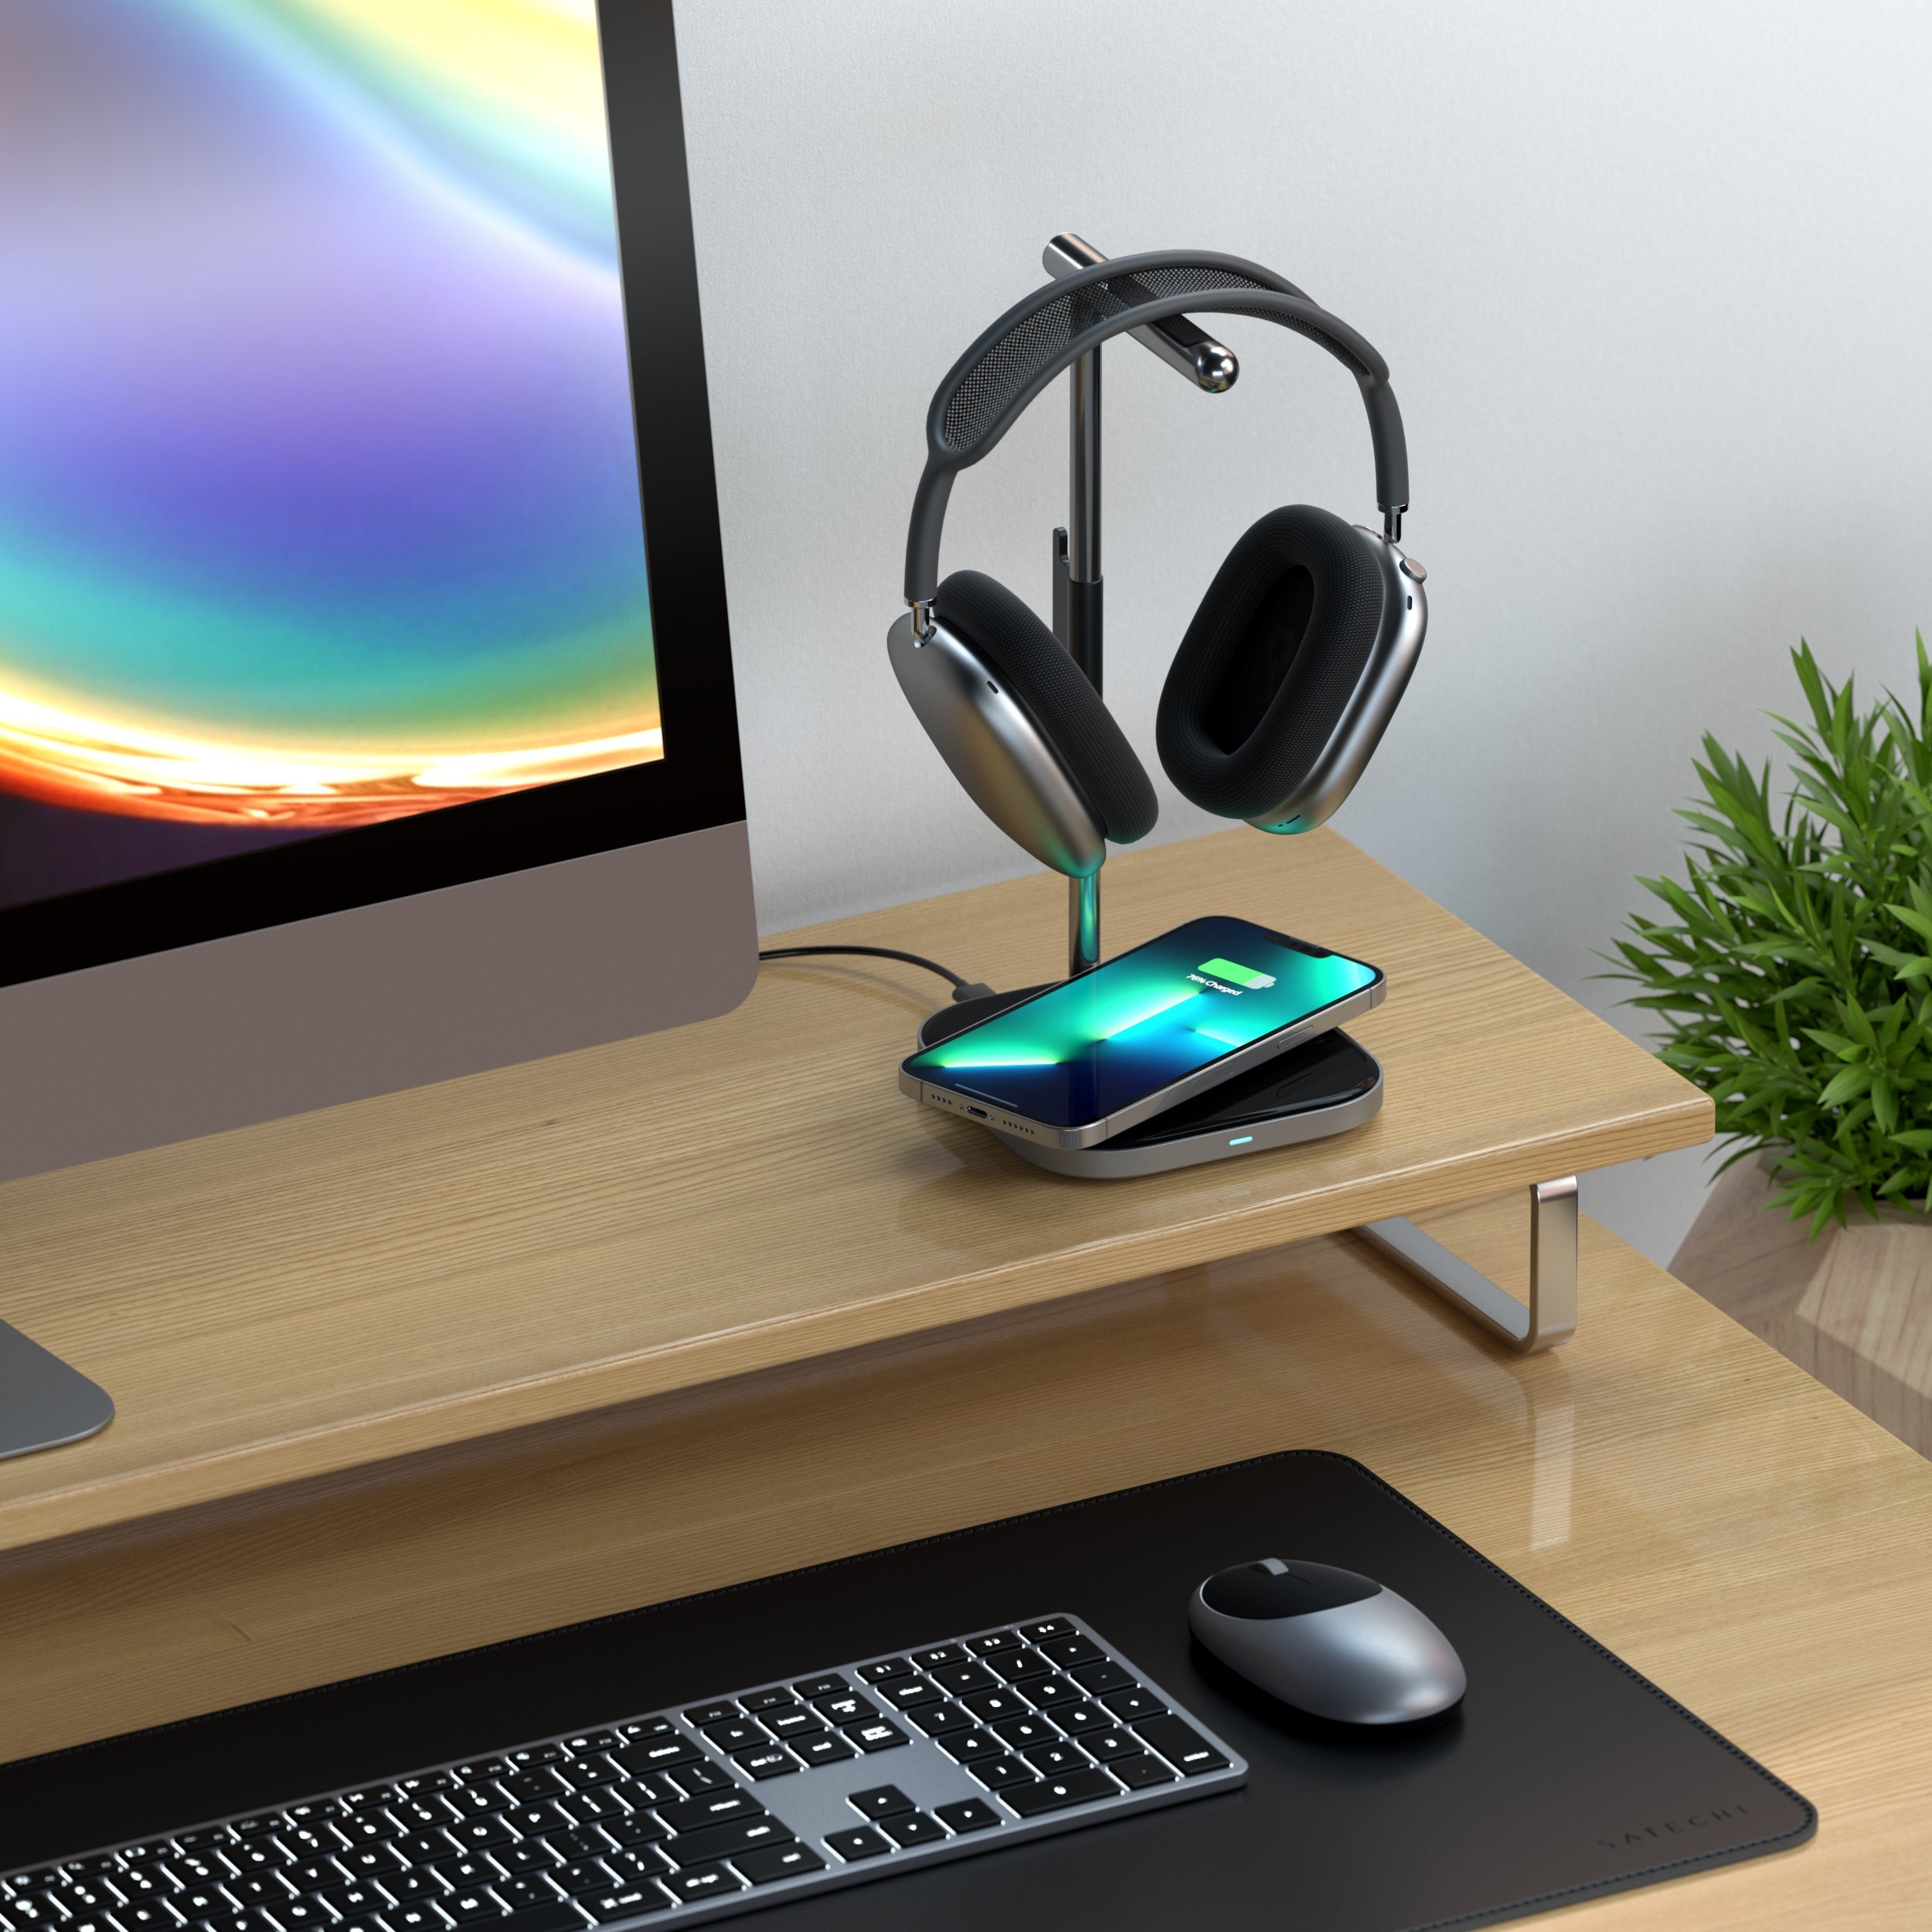 Satechi 2-in-1 Headphone Stand with Wireless Charger, Silver